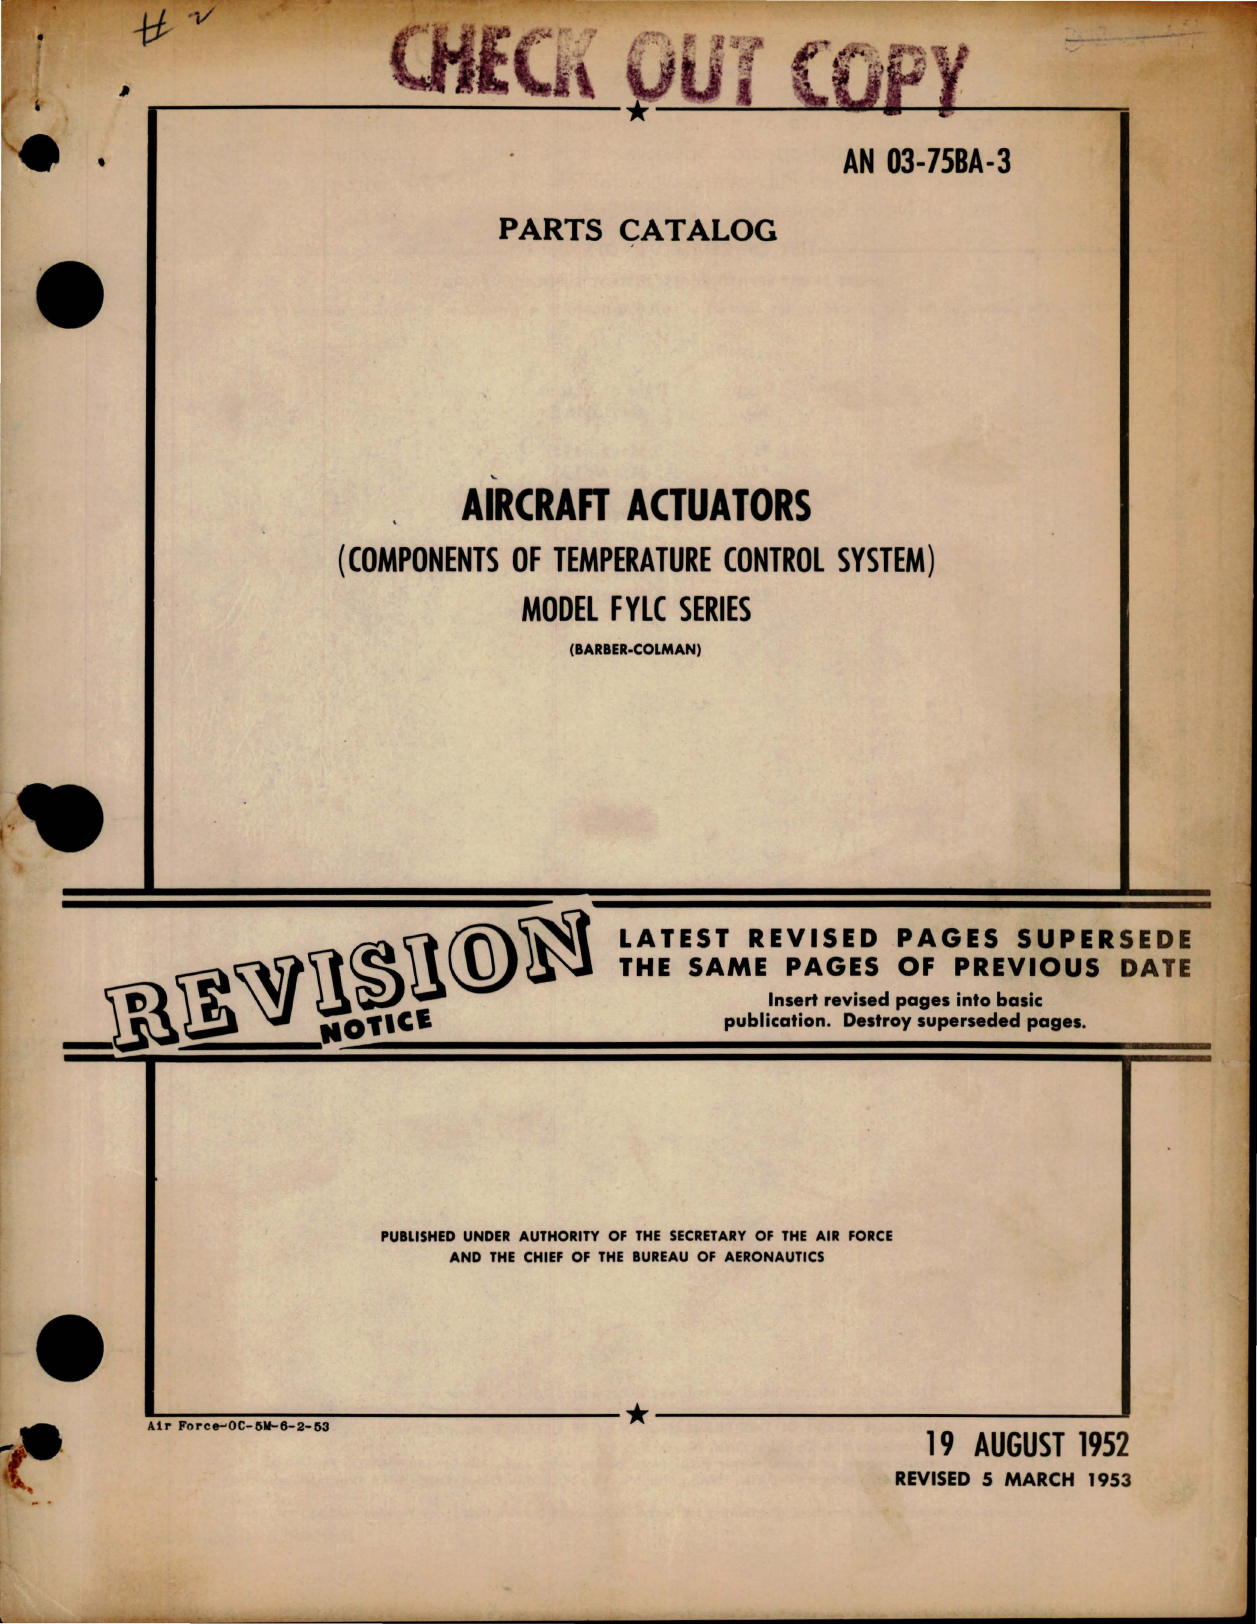 Sample page 1 from AirCorps Library document: Parts Catalog for Aircraft Actuators - Model FYLC Series - Components of Temperature Control System